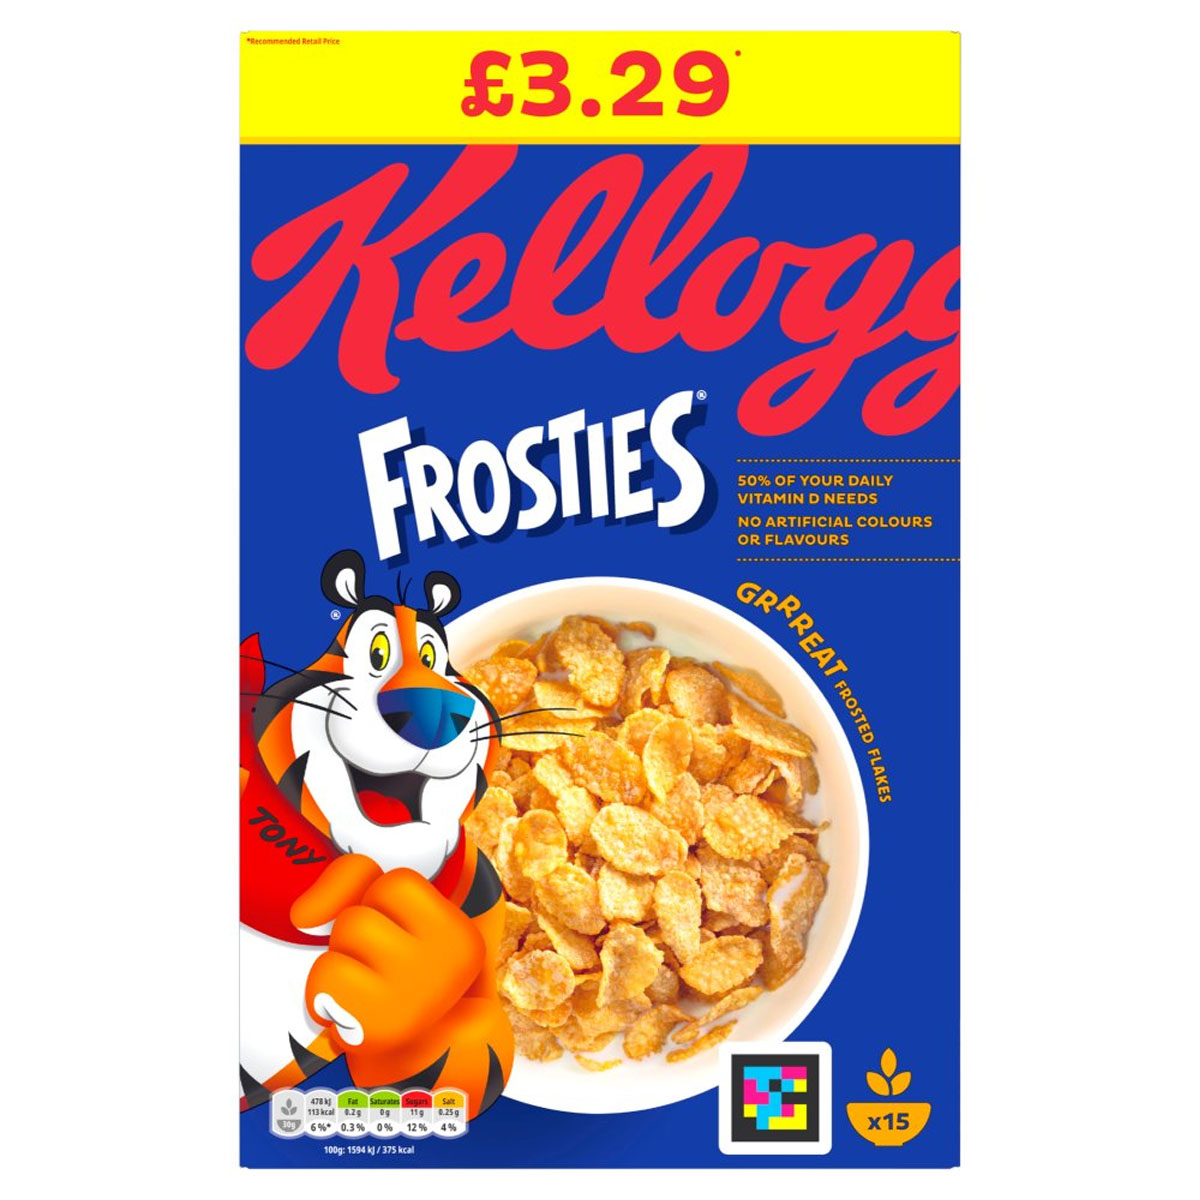 Kellogg's - Frosties Breakfast Cereal - 470g - Continental Food Store